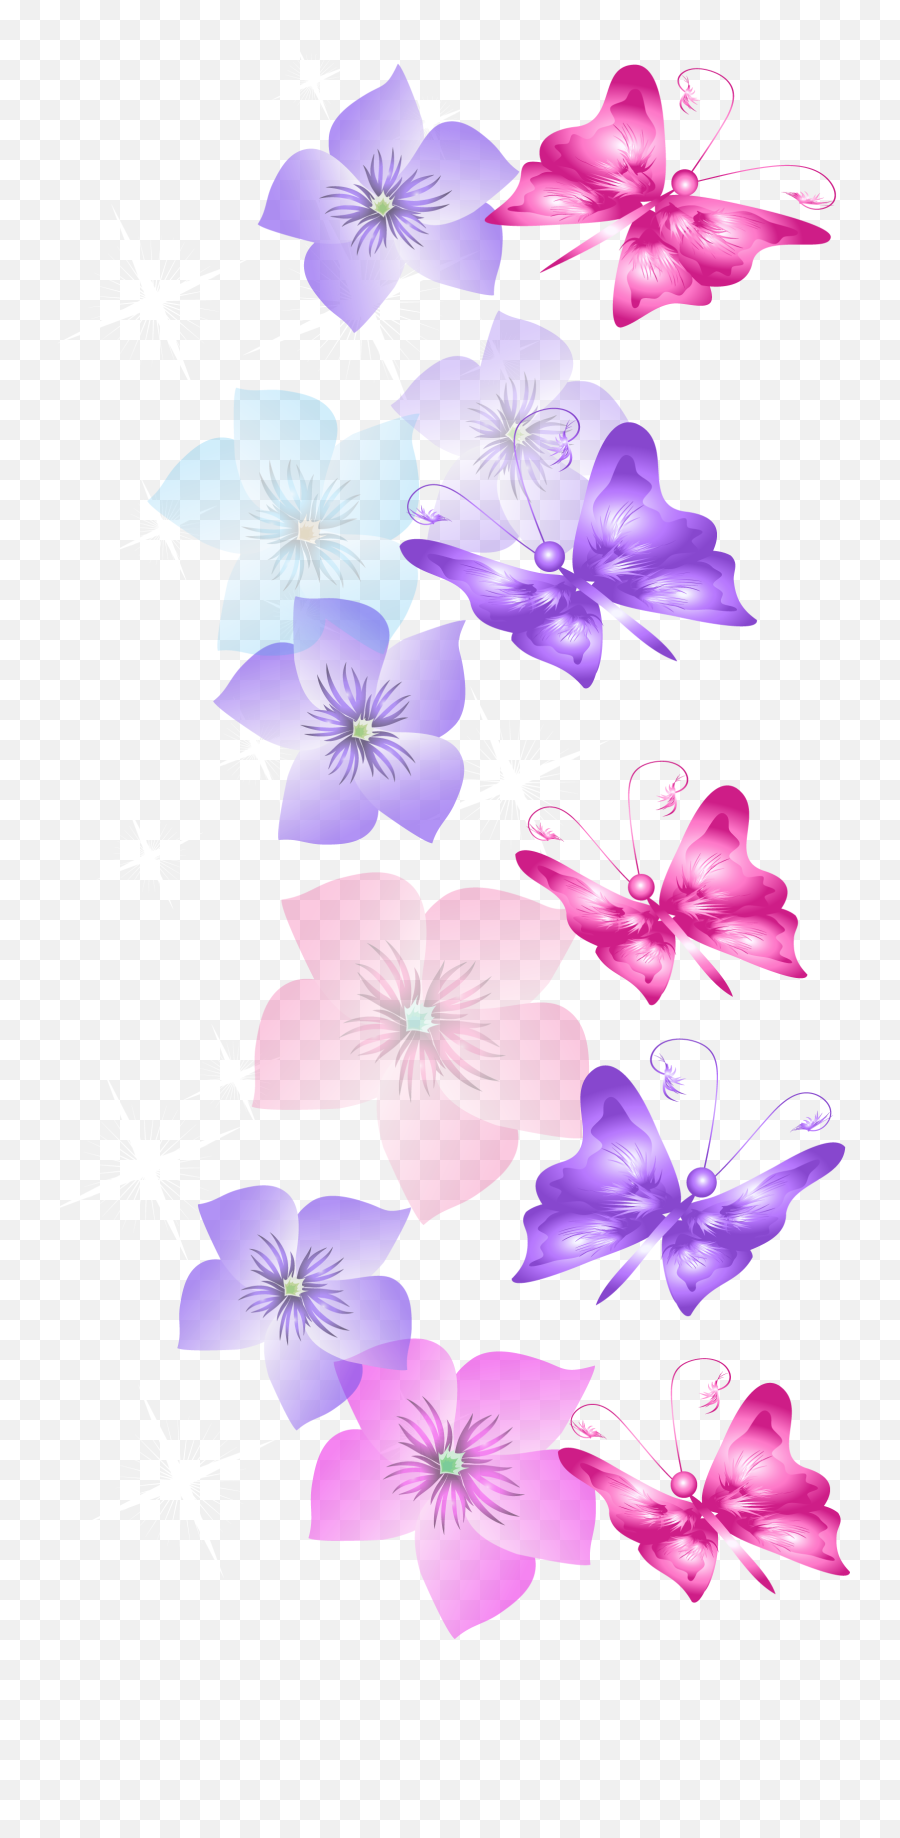 Butterflies And Flowers Decoration Png Clipart Flower - Marco Flores Y Mariposas,Decoration Png